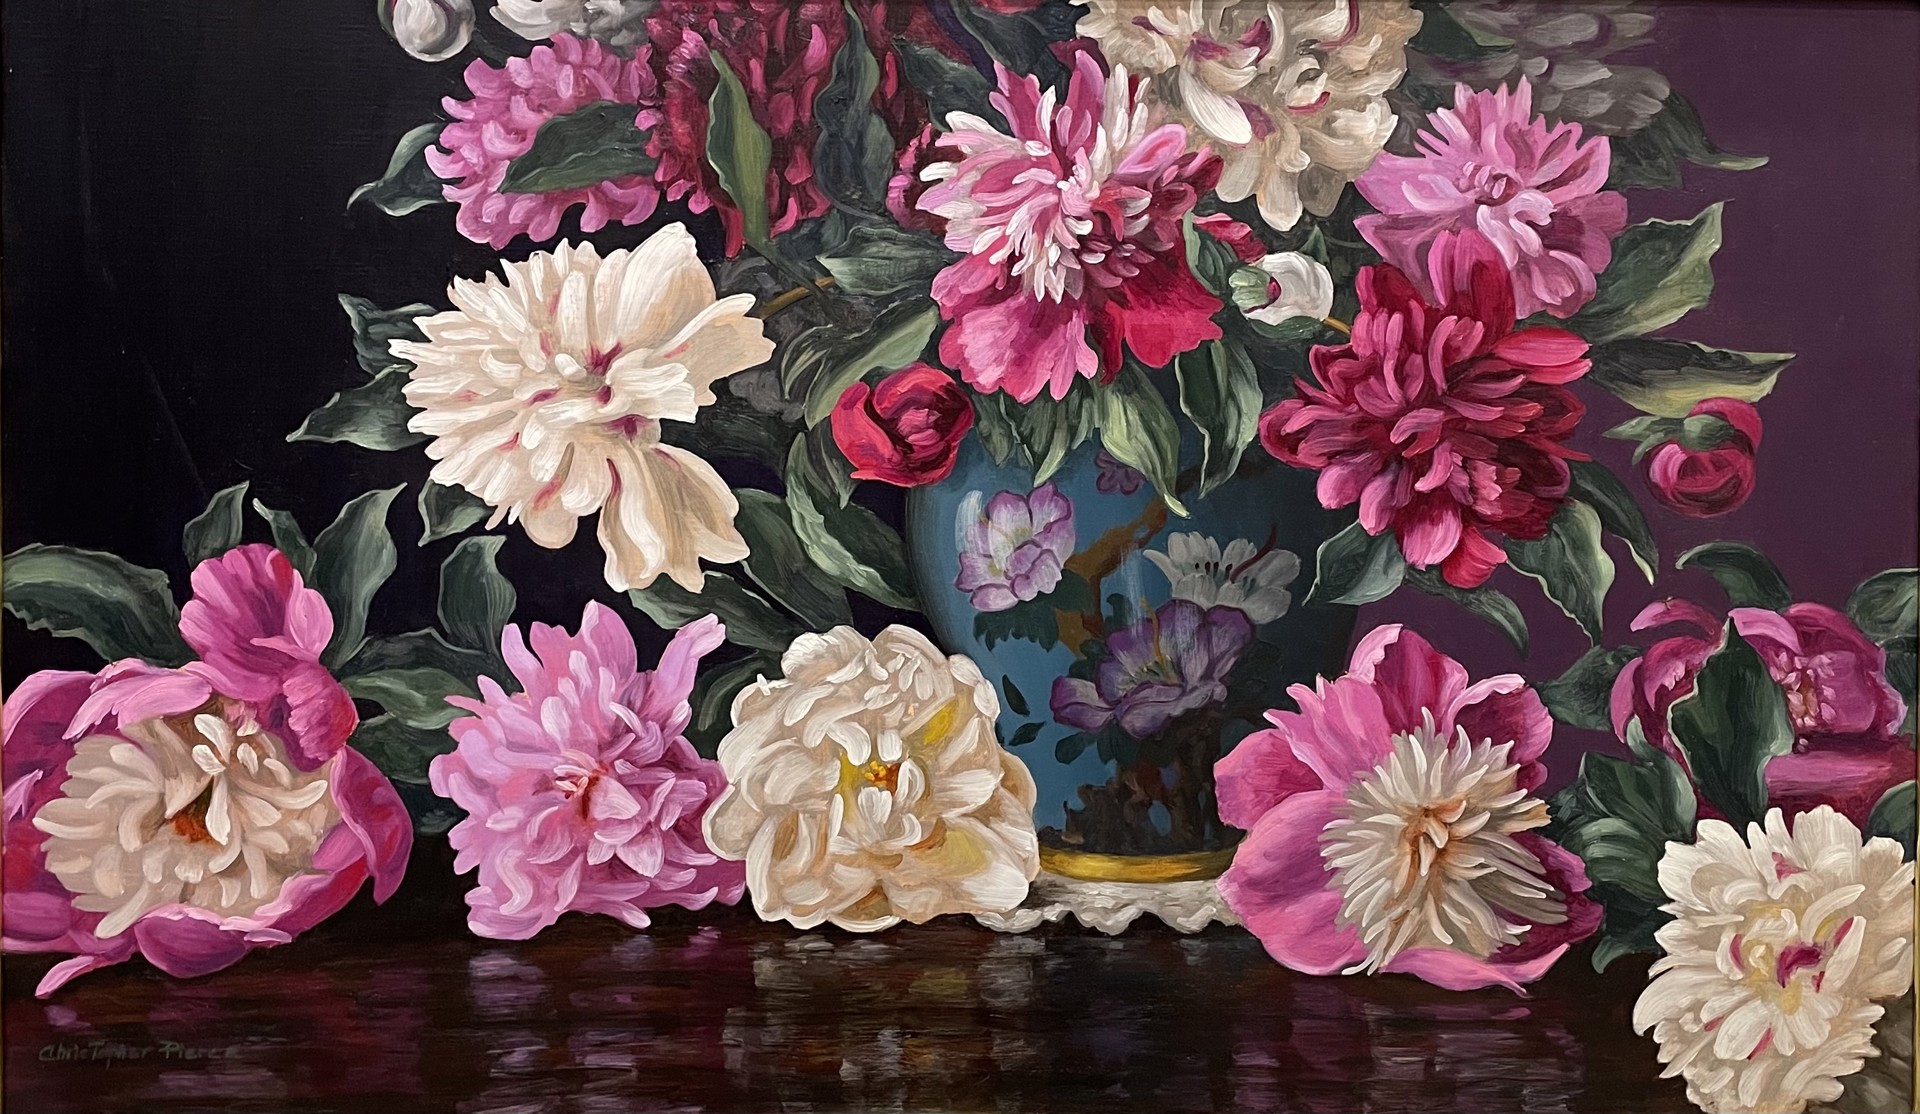 Peonies with Blue Japanese Vase by Christopher Pierce